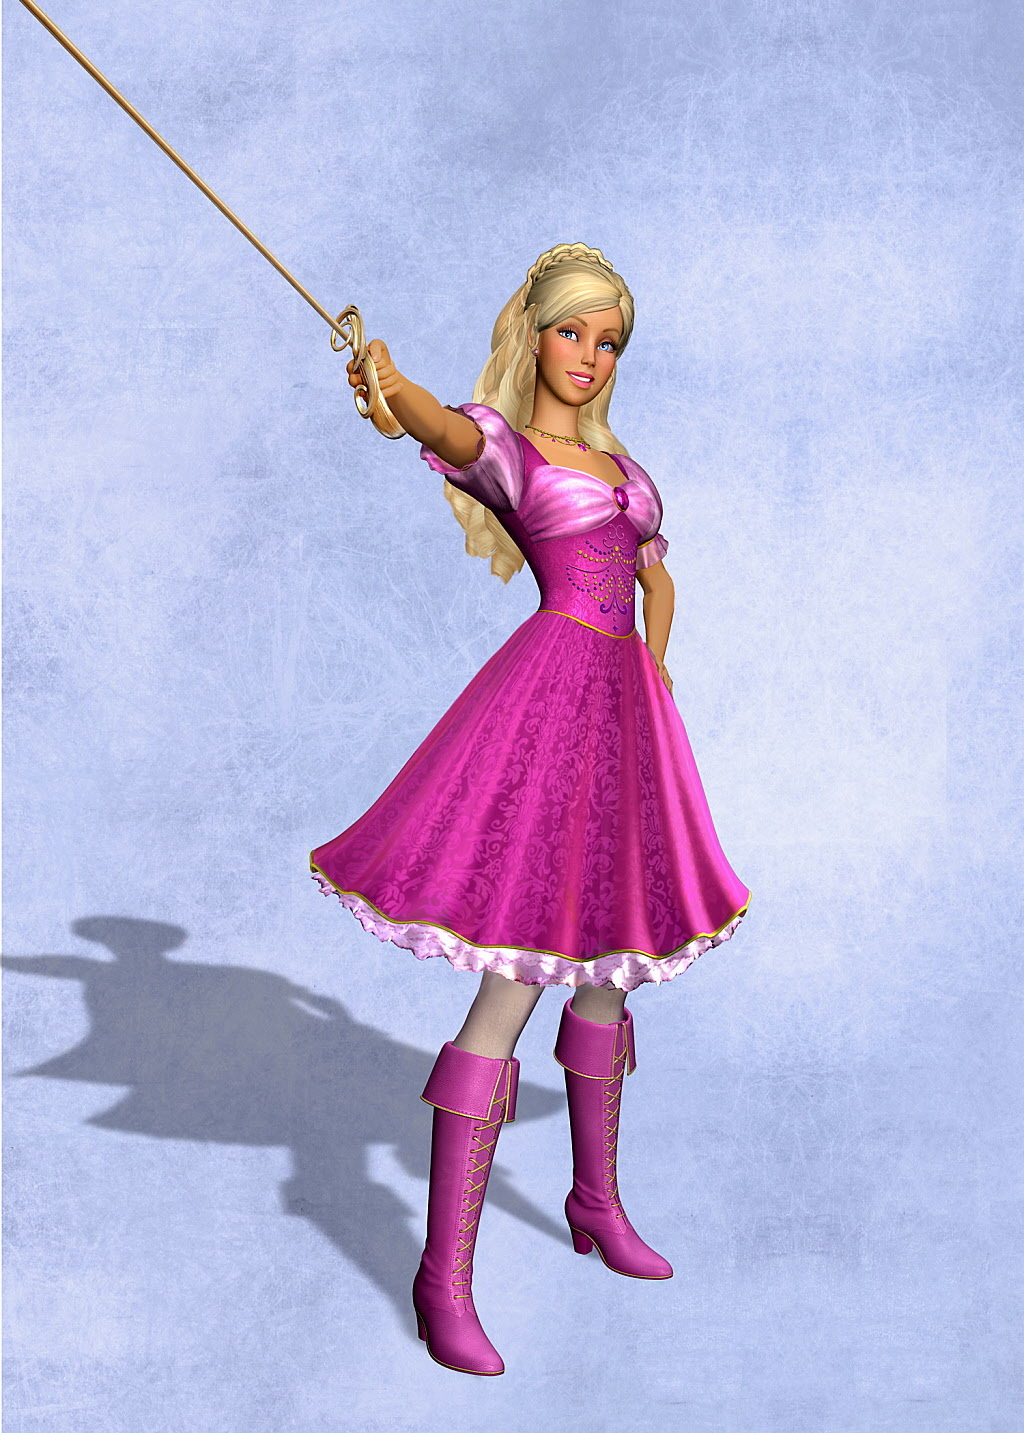 barbie-and-the-3-musketeers-barbie-movies-photo-33146957-fanpop